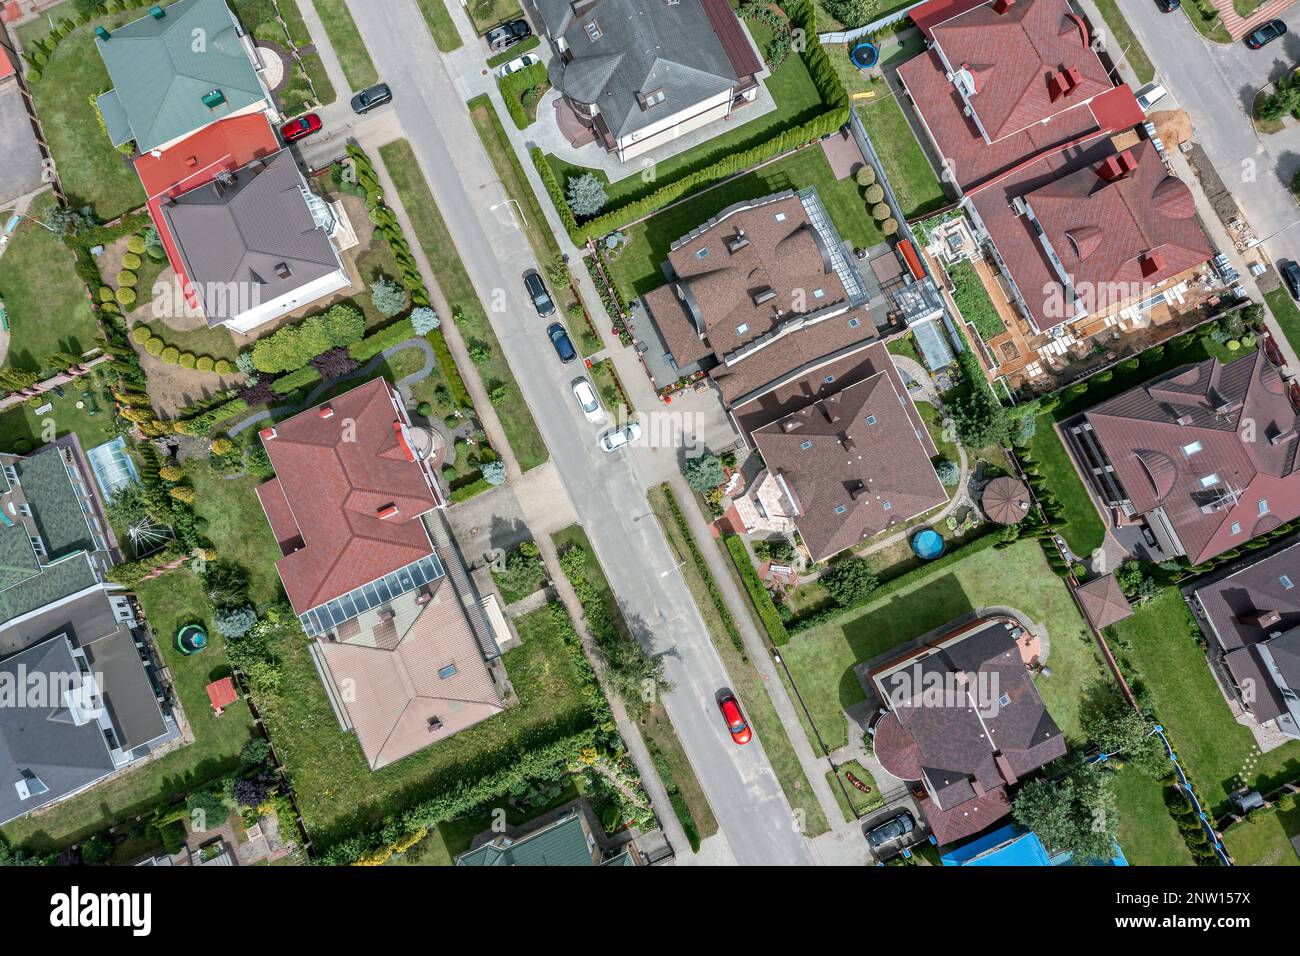 aerial view of private houses in residential area of typical suburb community Stock Photo